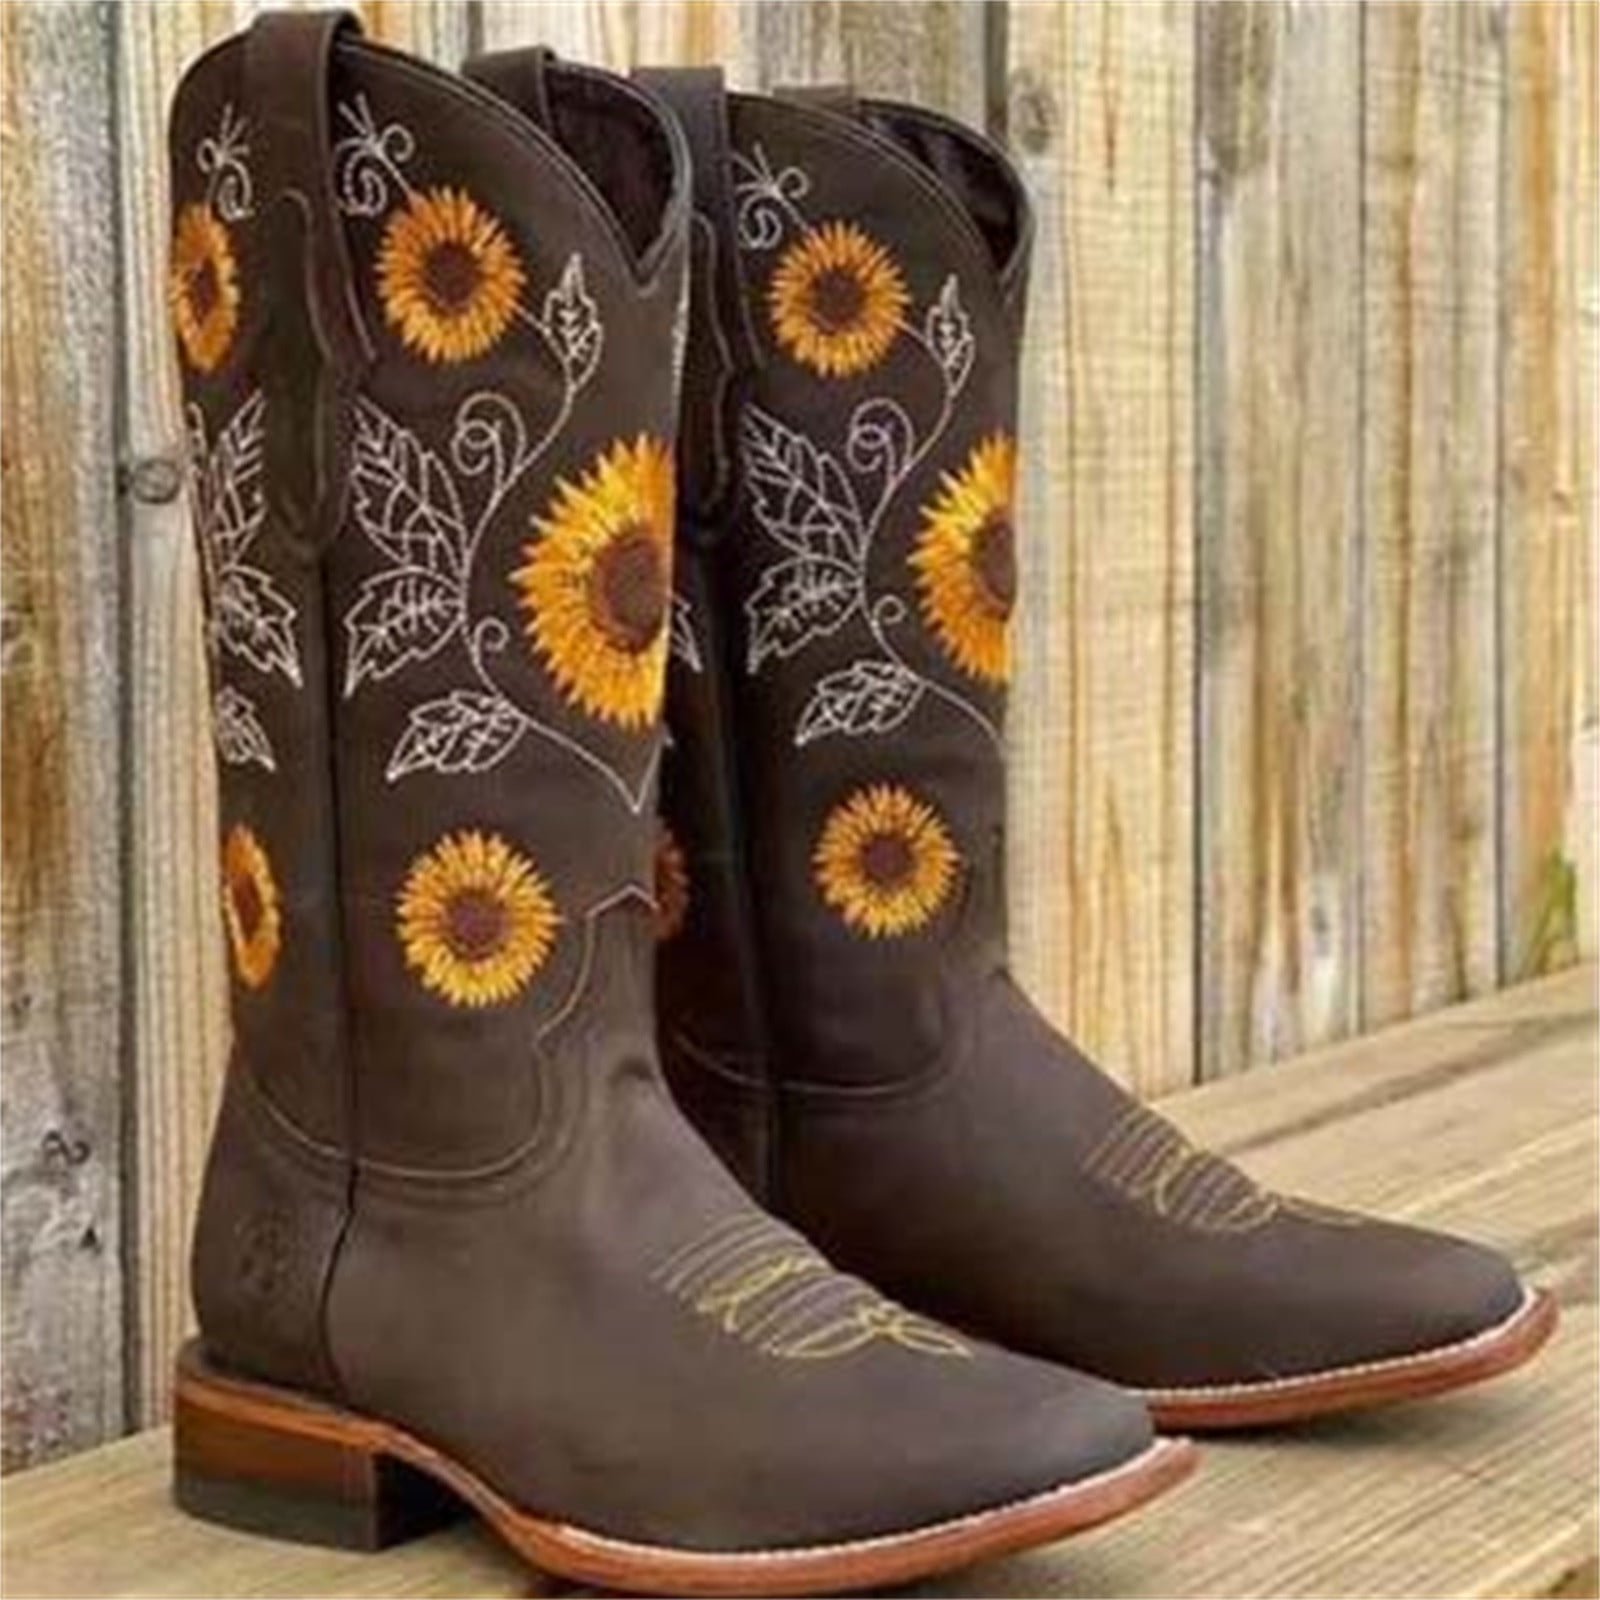 Boots for Women'S Sunflower Printed Western Boots Cowgirl Round Toe Short Boots Embroidered Boots,Retro Middle Boots Ethnic Totem Women decoration for - Walmart.com